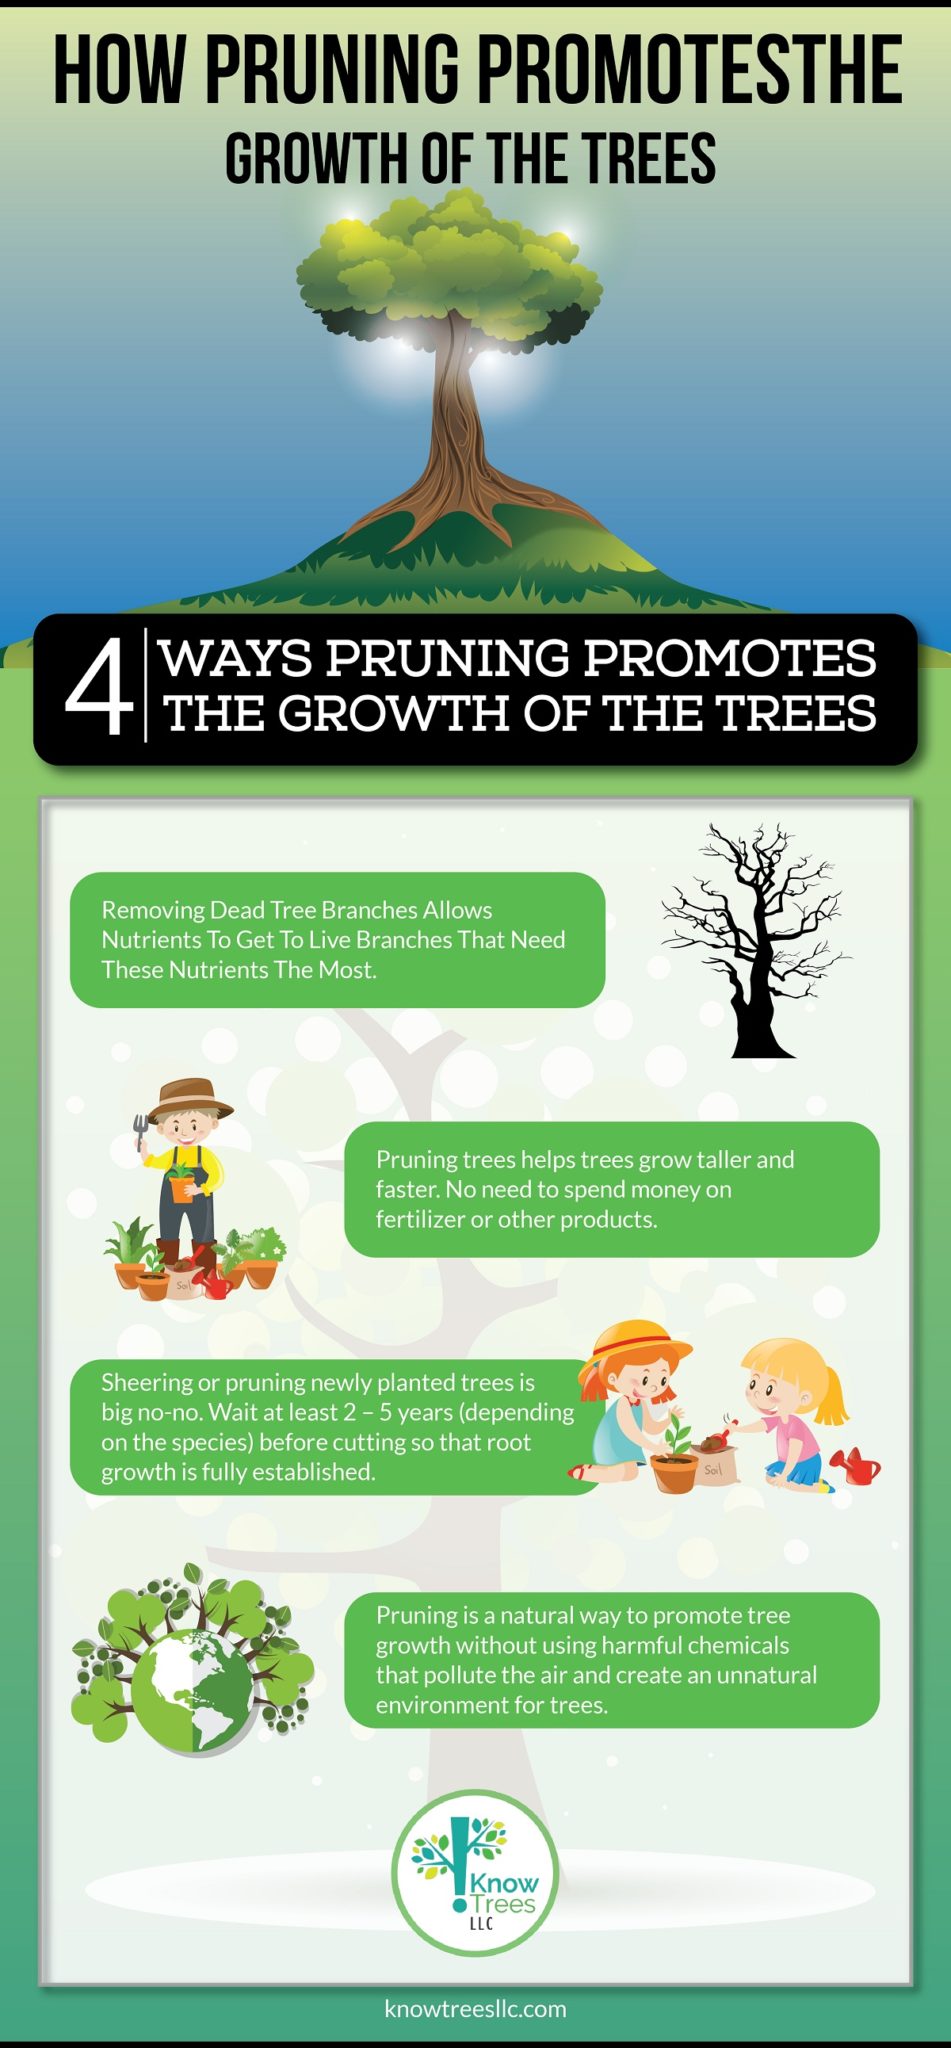 KnowTrees - Pruning Promotes the Growth of The Trees